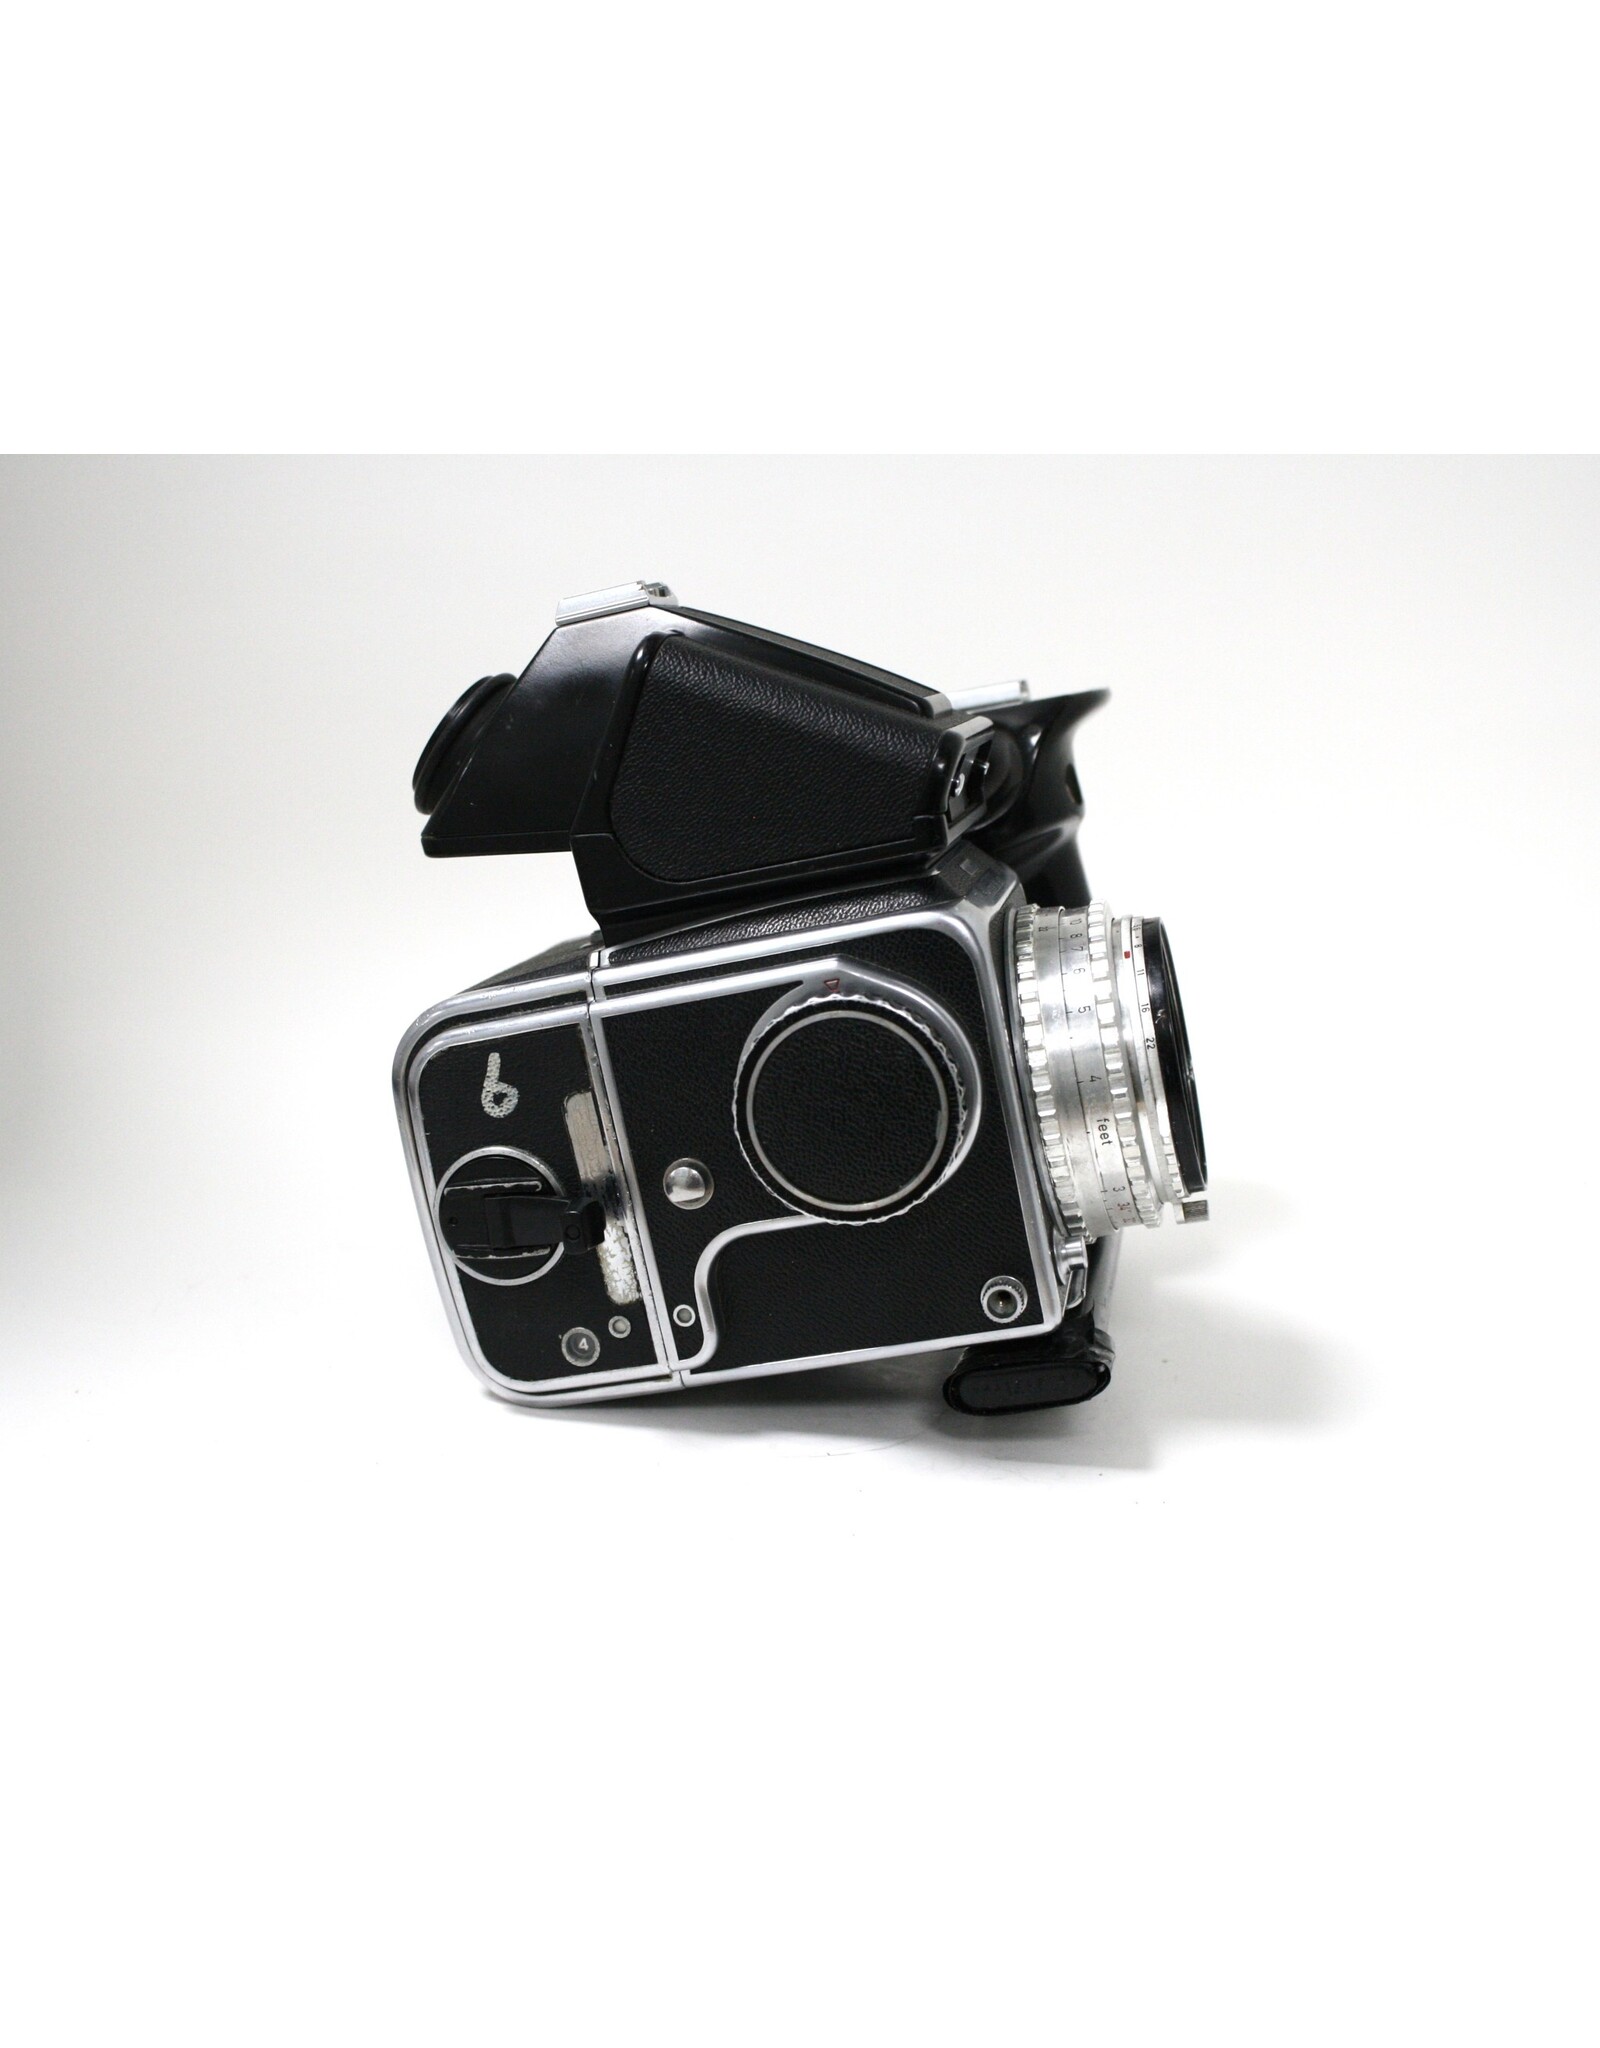 Hasselblad Hasselblad 1000F Chrome SLR Camera Zeiss Tessar 2.8/80mm lens  with Metered Prism